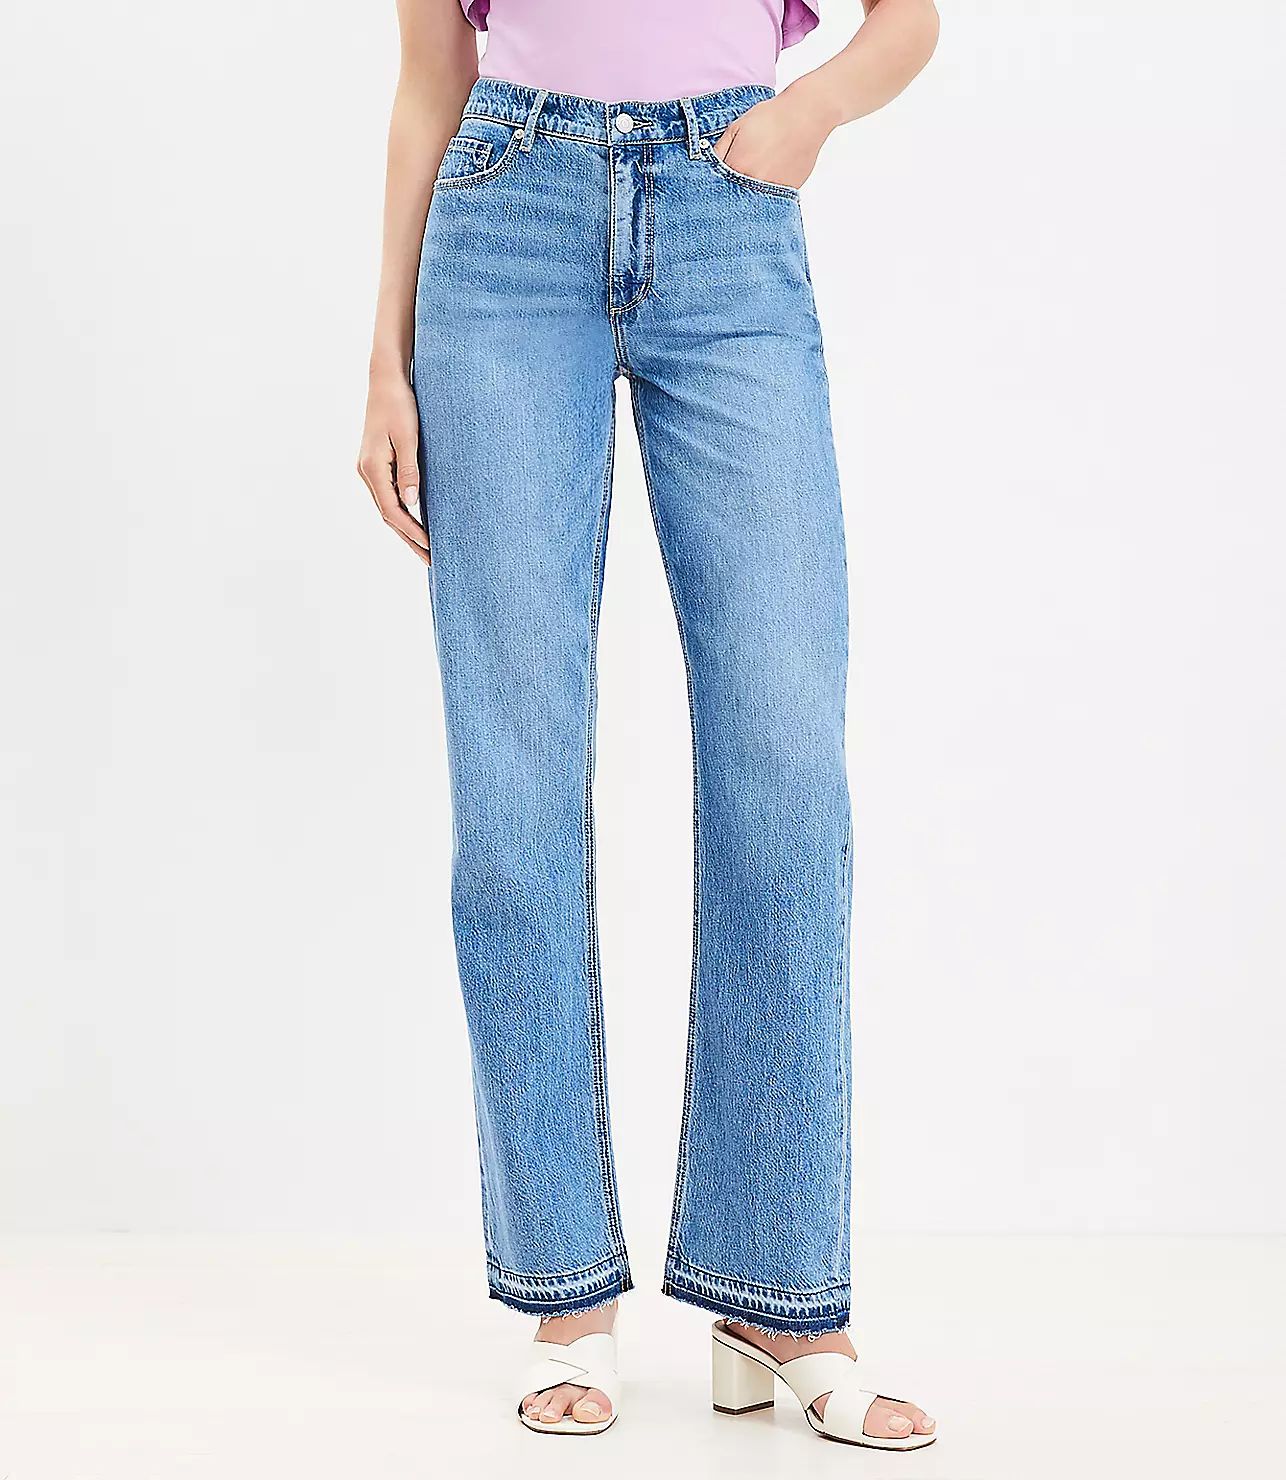 Let Down Hem High Rise Full Length Straight Jeans in Destructed Mid Stone Wash | LOFT